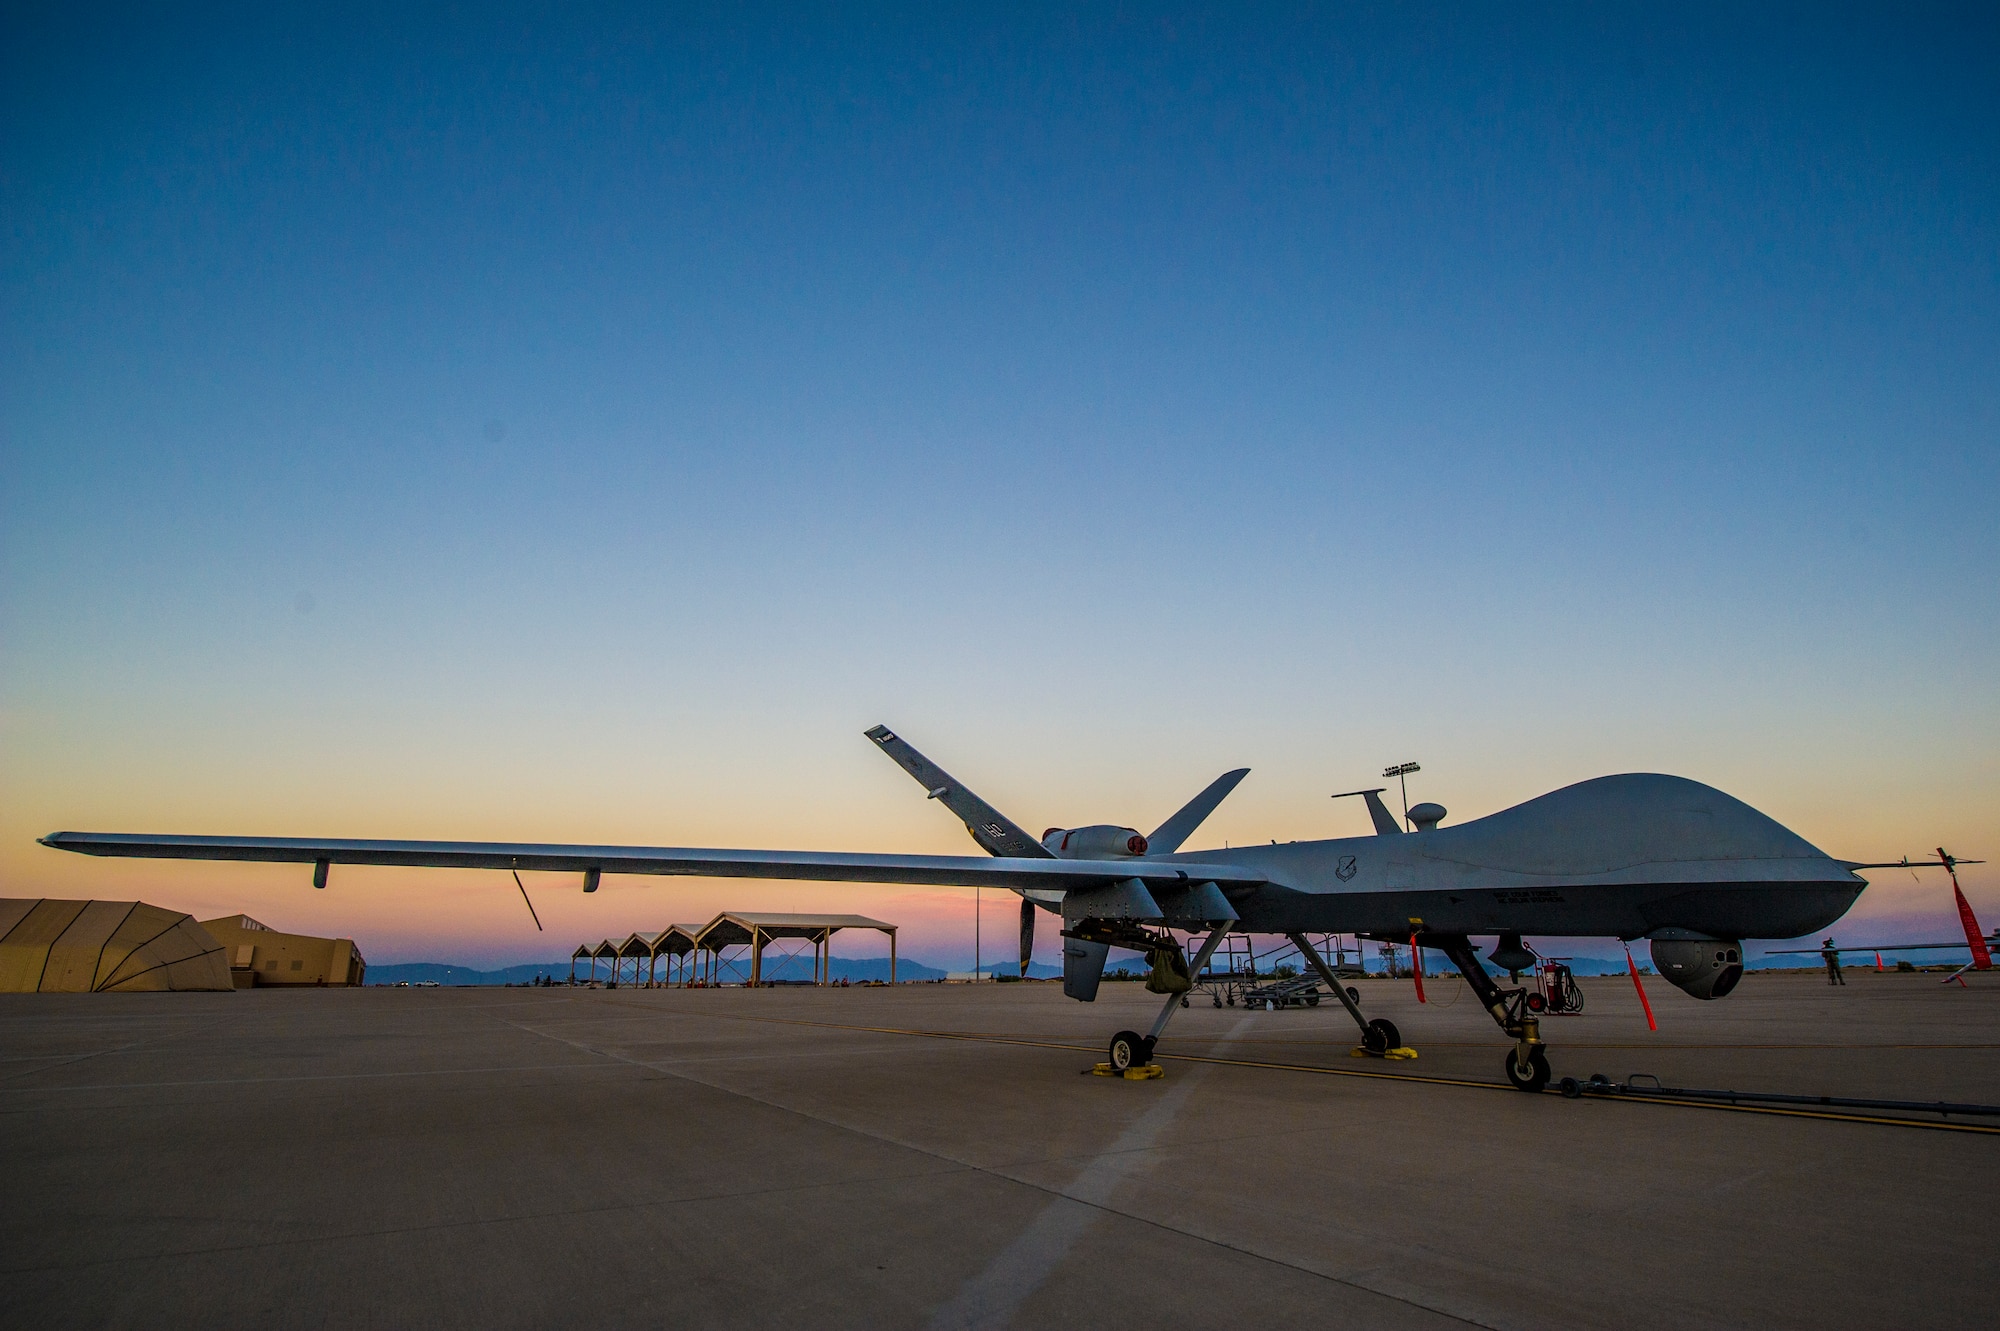 An MQ-9 Reaper sits on the flight line of Holloman Air Force Base, N.M., Jan. 27. The MQ-9 is involved in remote split-operations which allows Airmen at Ellsworth Air Force Base, S.D.,to fly and train on aircraft shared with Holloman AFB. (U.S. Air Force photo by Airman 1st Class Aaron Montoya/released) 